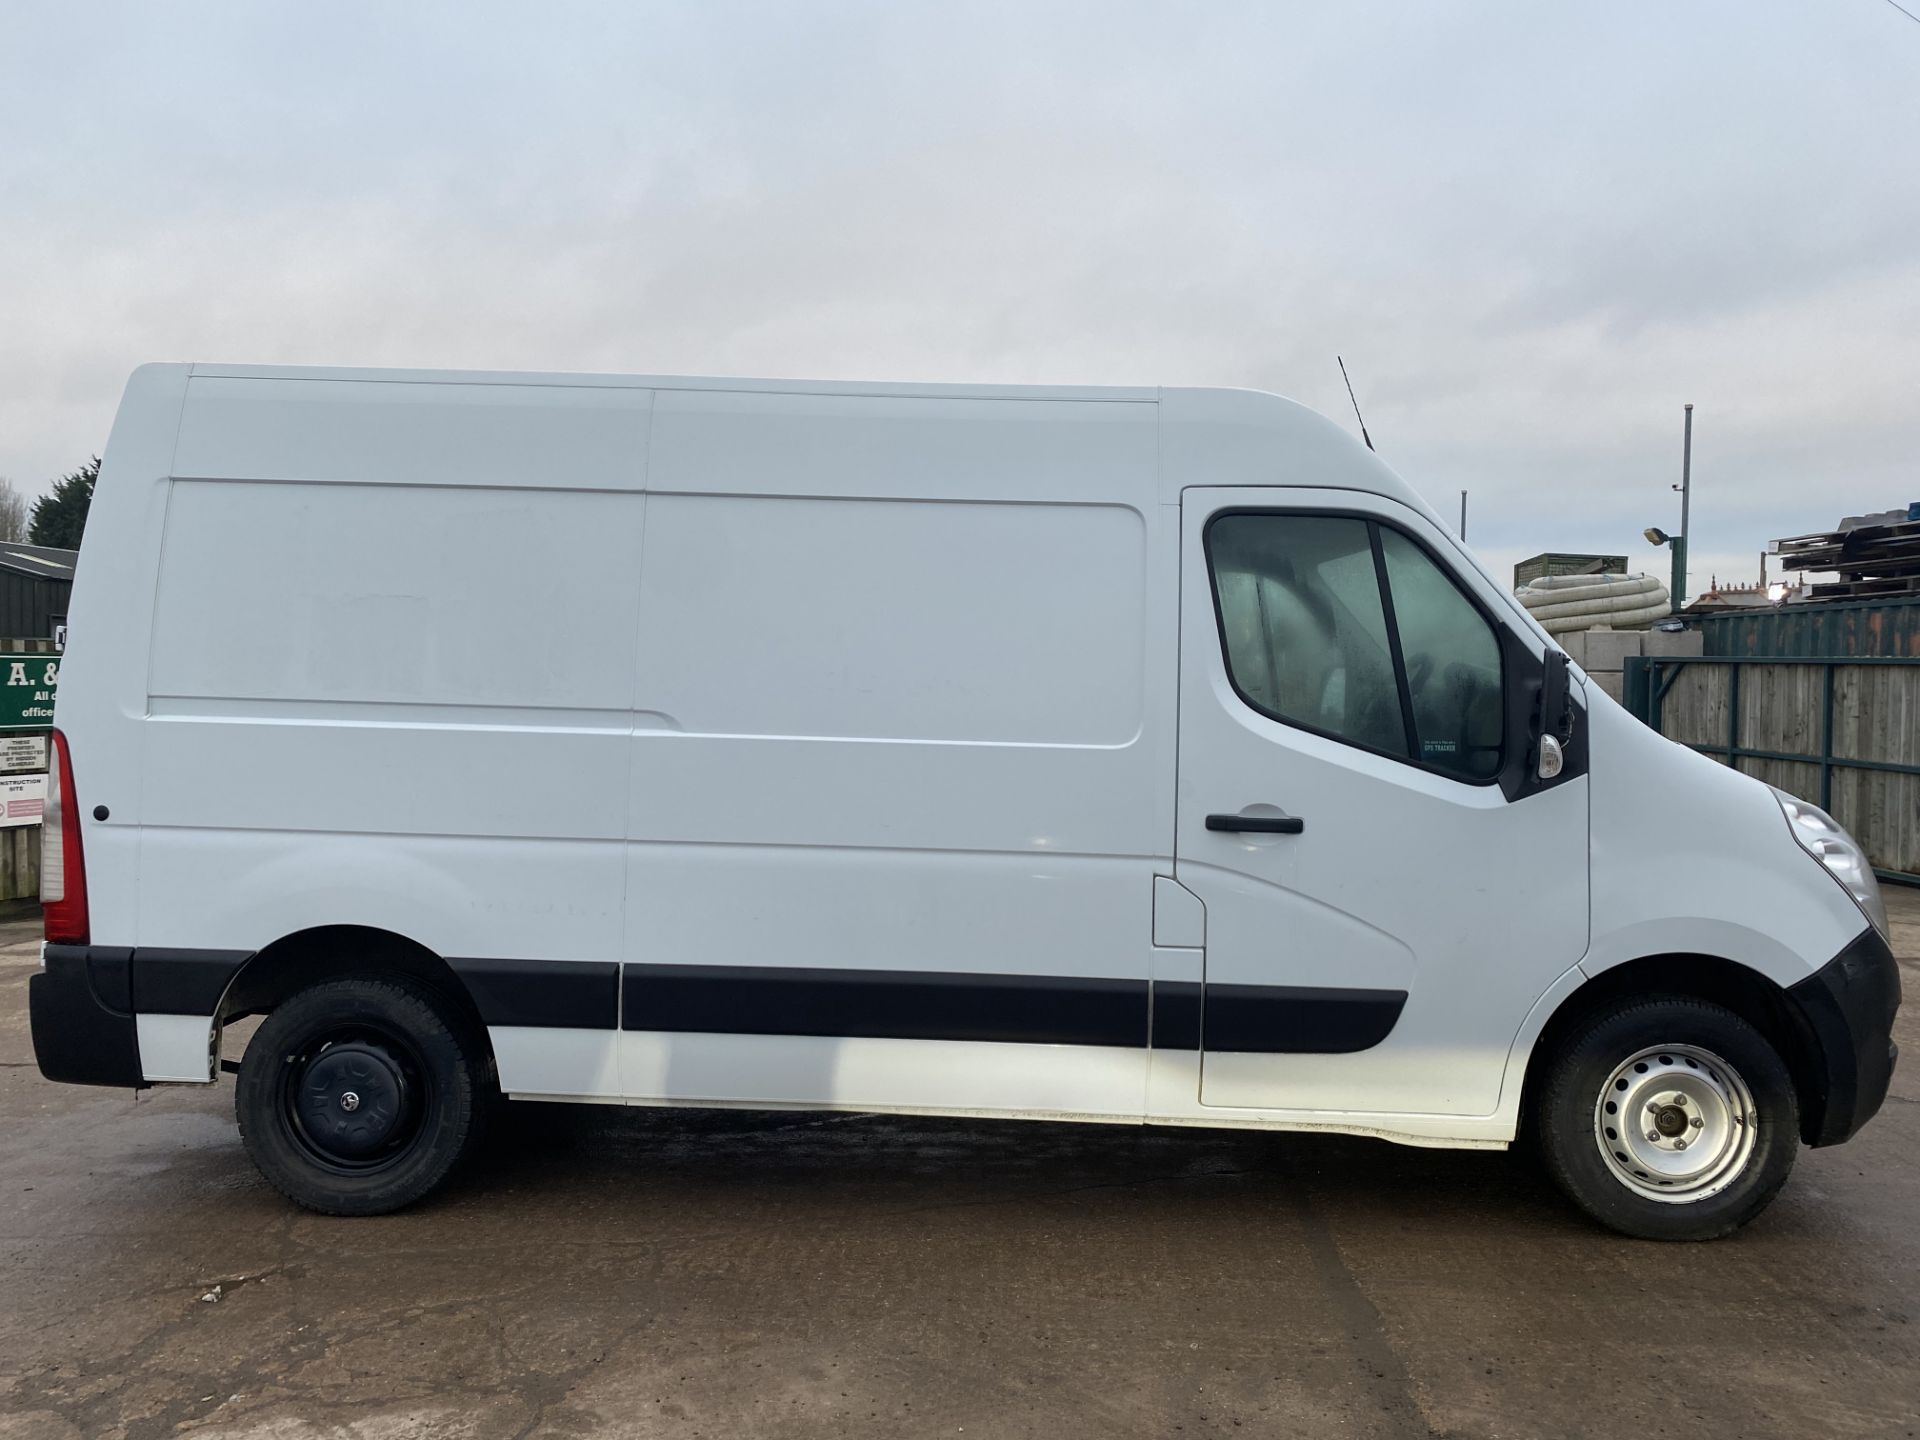 (ON SALE) RENAULT MASTER / VAUXHALL MOVANO 2.3CDTI (130) EURO 6 - 66 REG - ONLY 99K MILES - AIR CON - Image 6 of 12